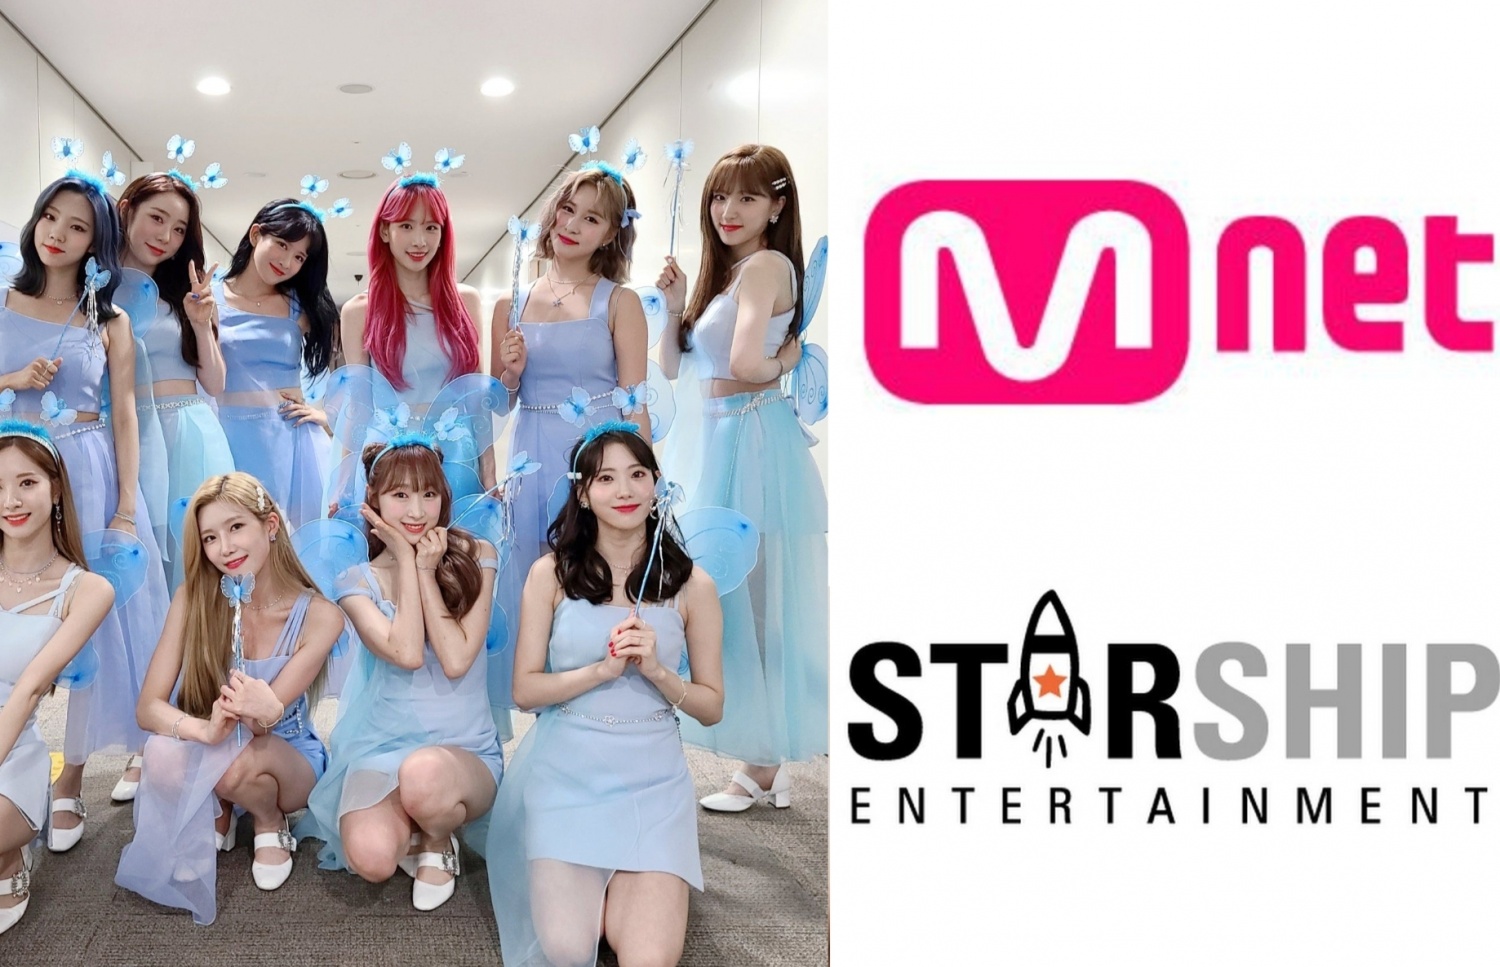 Image for Mnet Has Beef With Starship Entertainment? 'M Countdown' Explains Side After Excluding WJSN to Prior Lineup